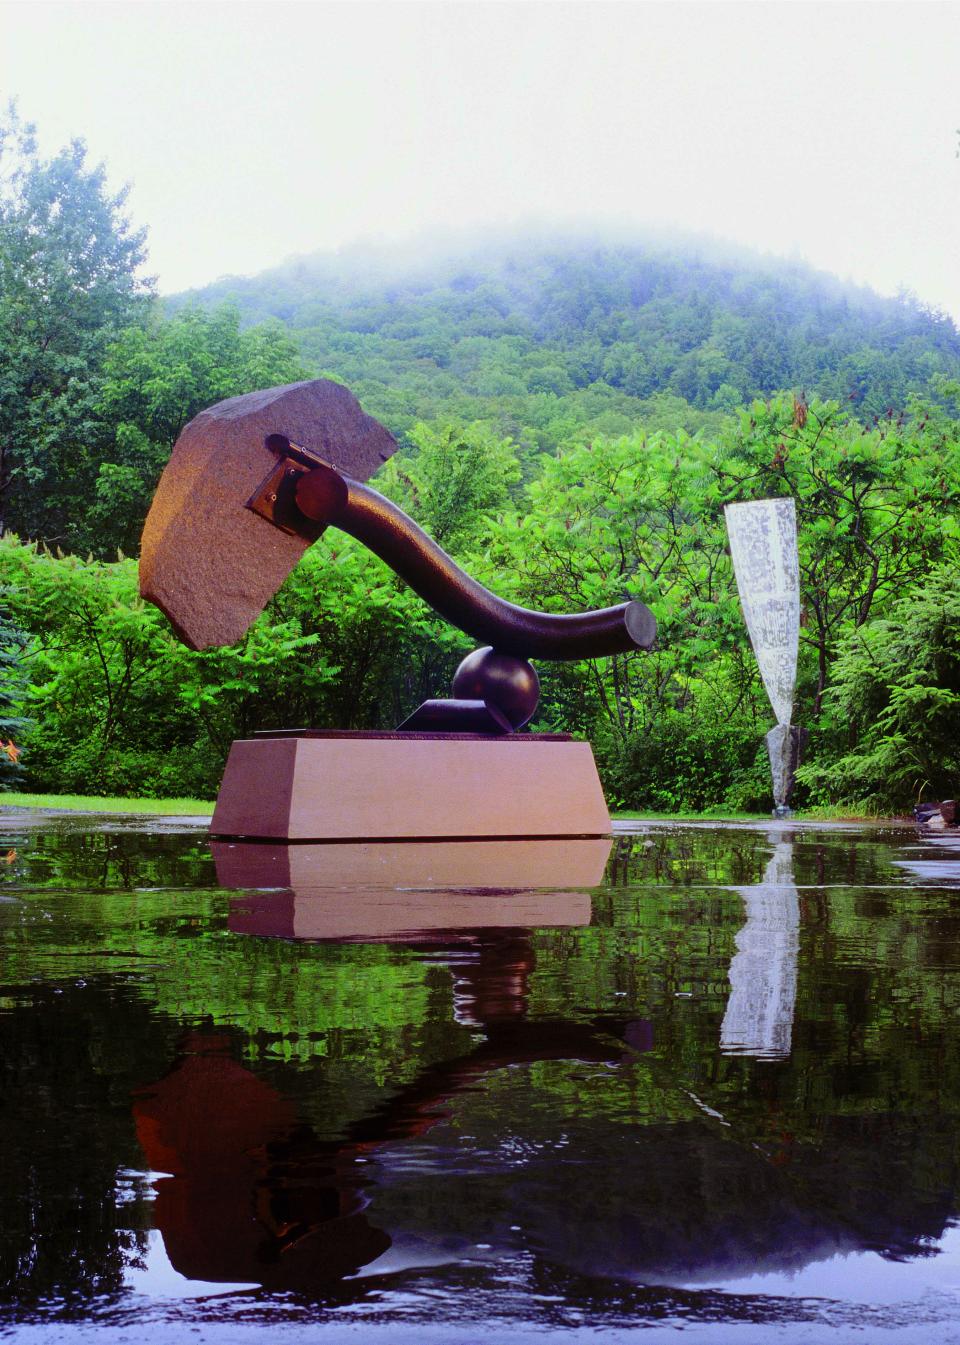 Here, a recent rain adds to the presence of the sculpture and the forest surroundings.